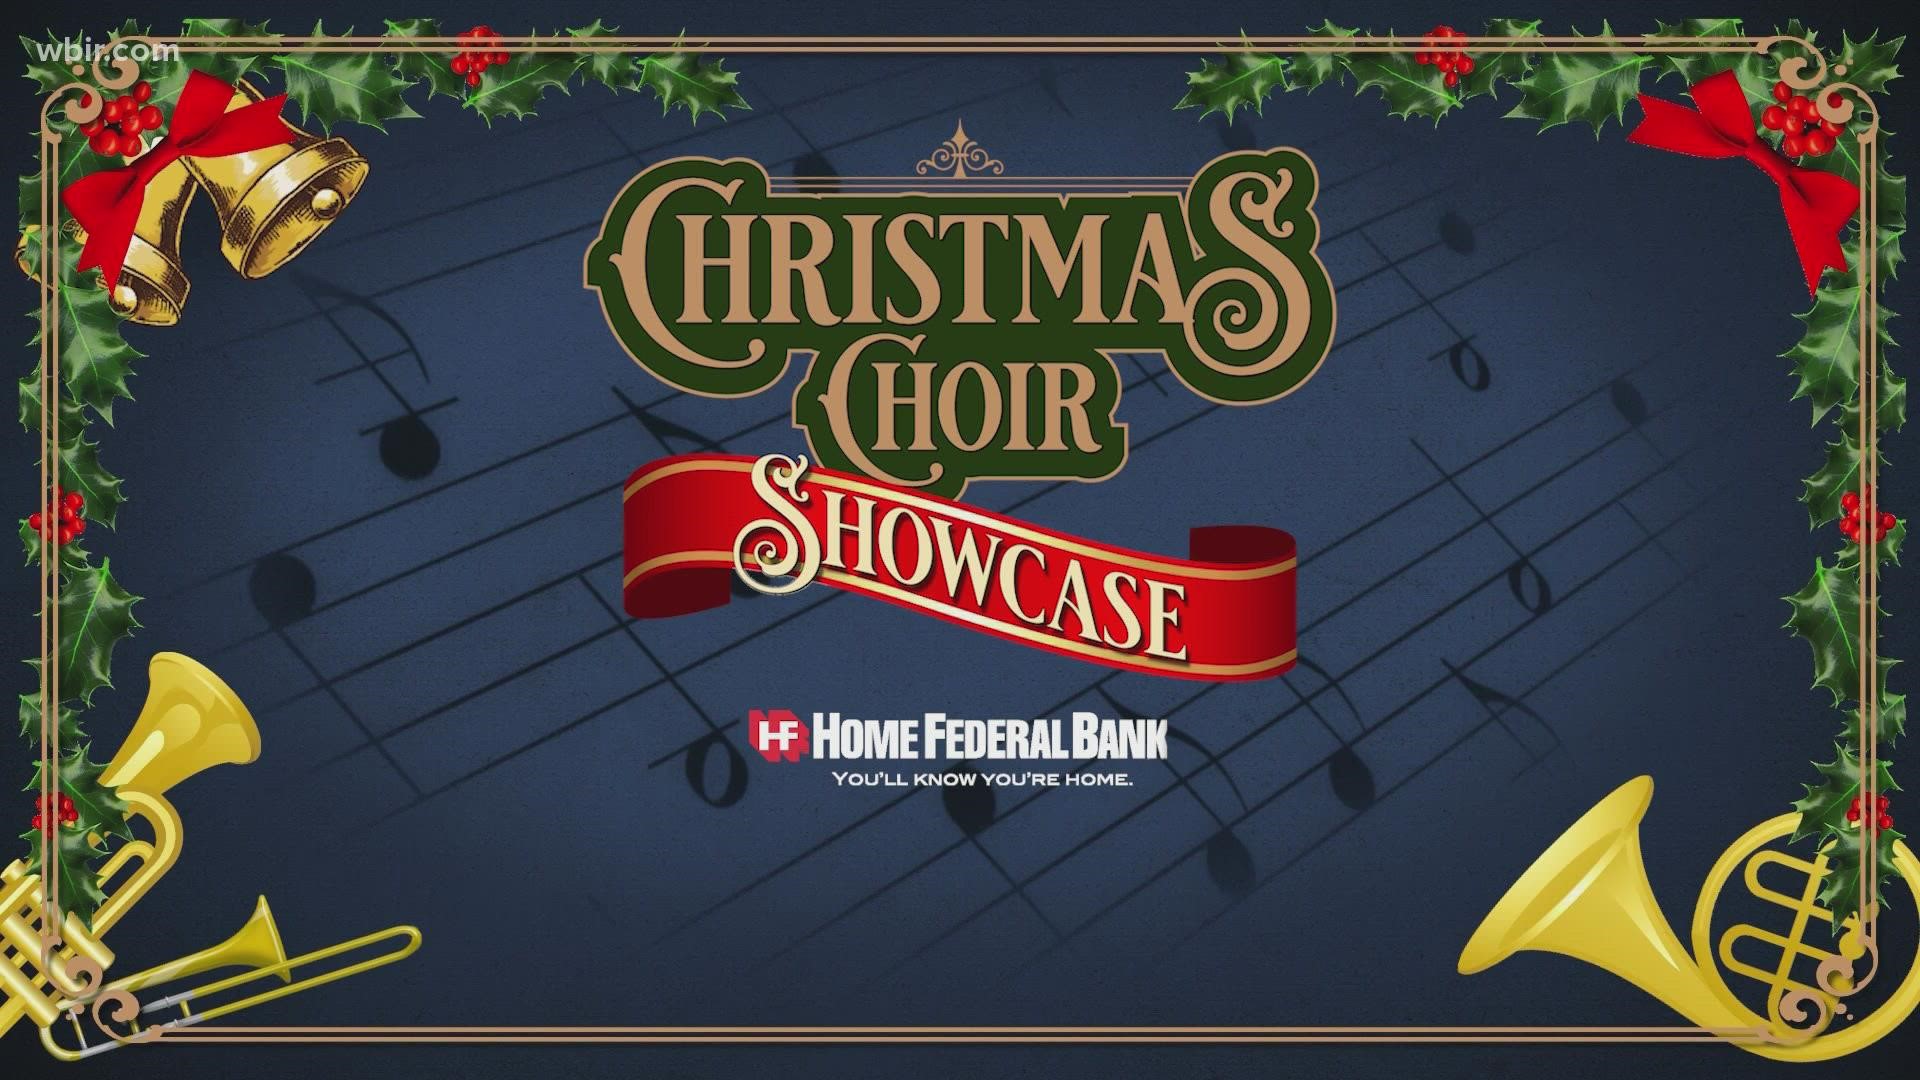 WBIR is inviting East Tennessee’s classrooms to celebrate Christmas with WBIR’s Christmas Choir Showcase sponsored by Home Federal Bank.